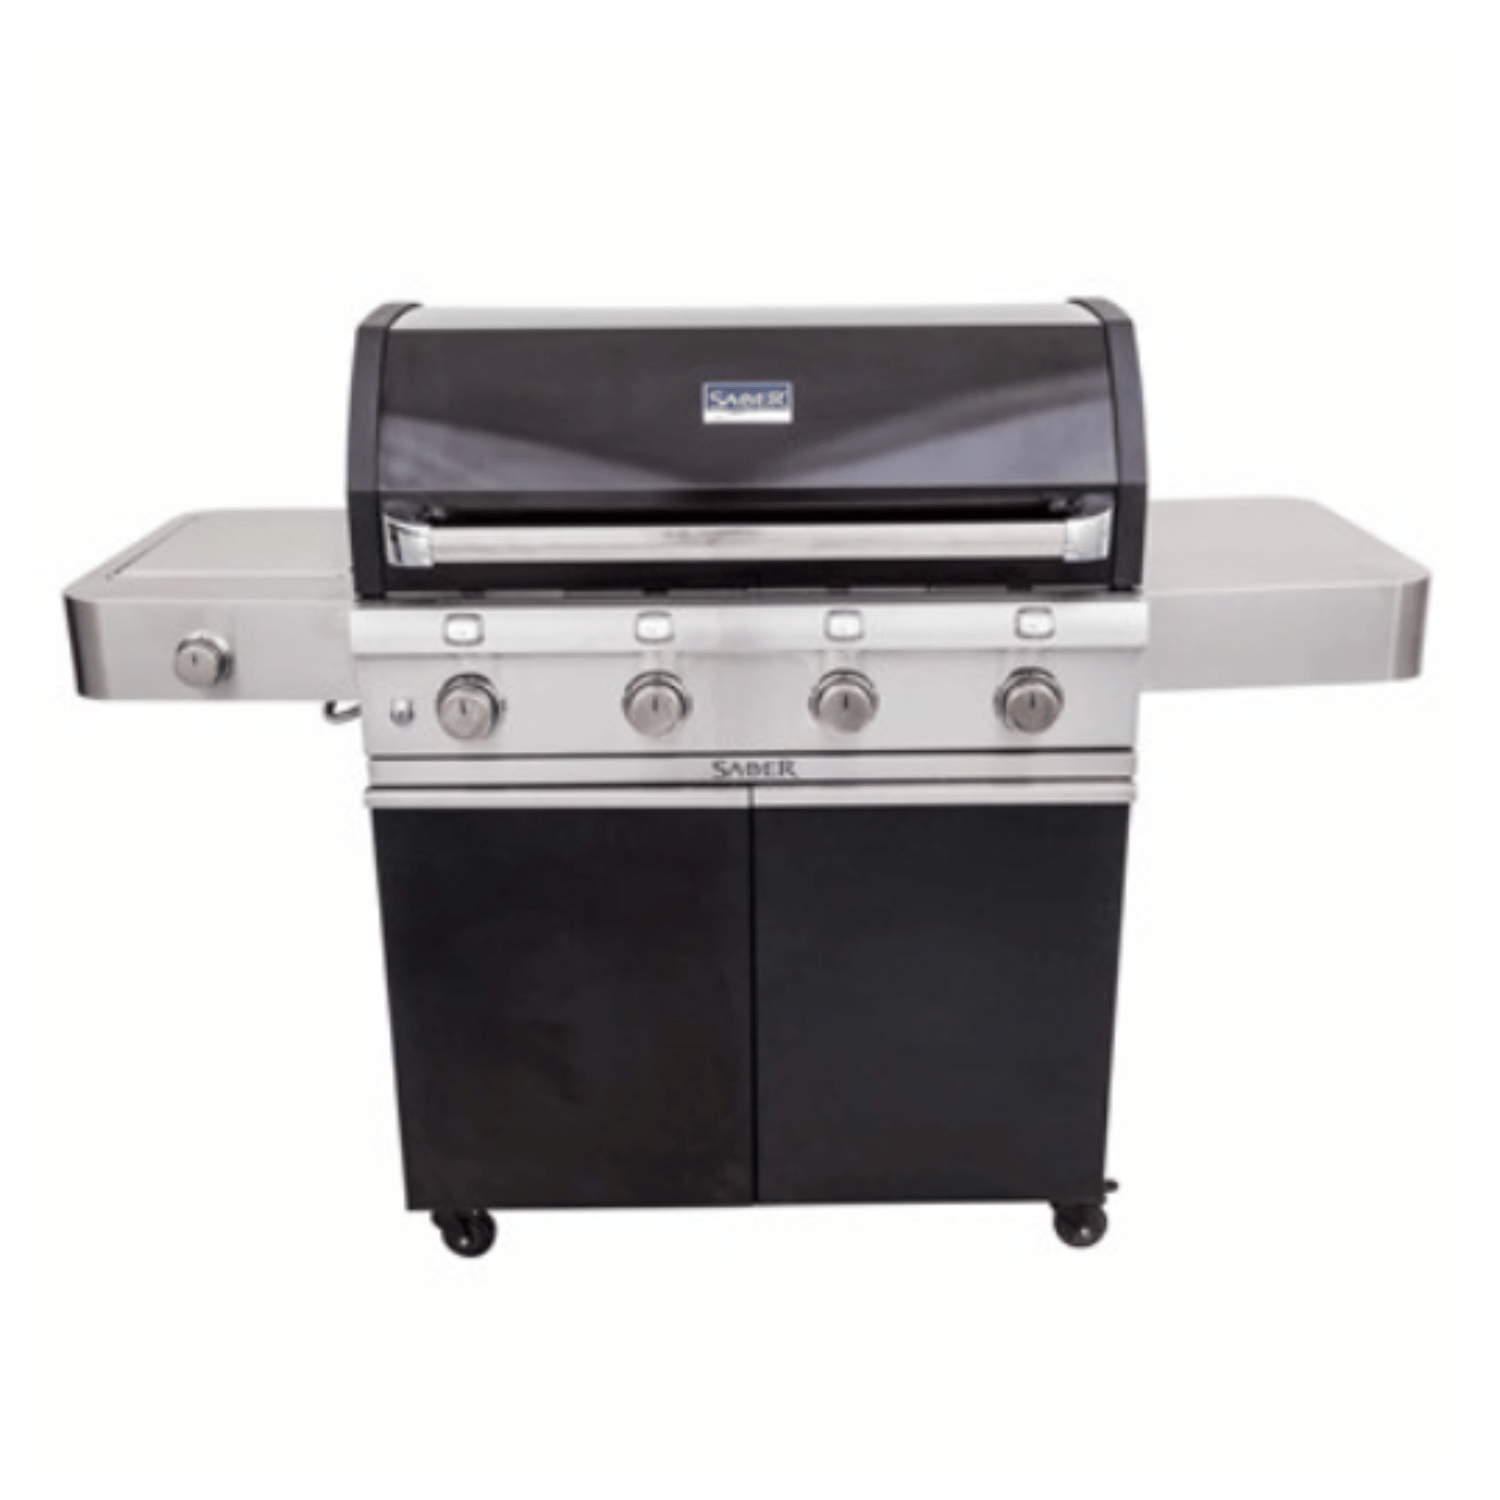 Barbecue Deluxe 670 – Saber